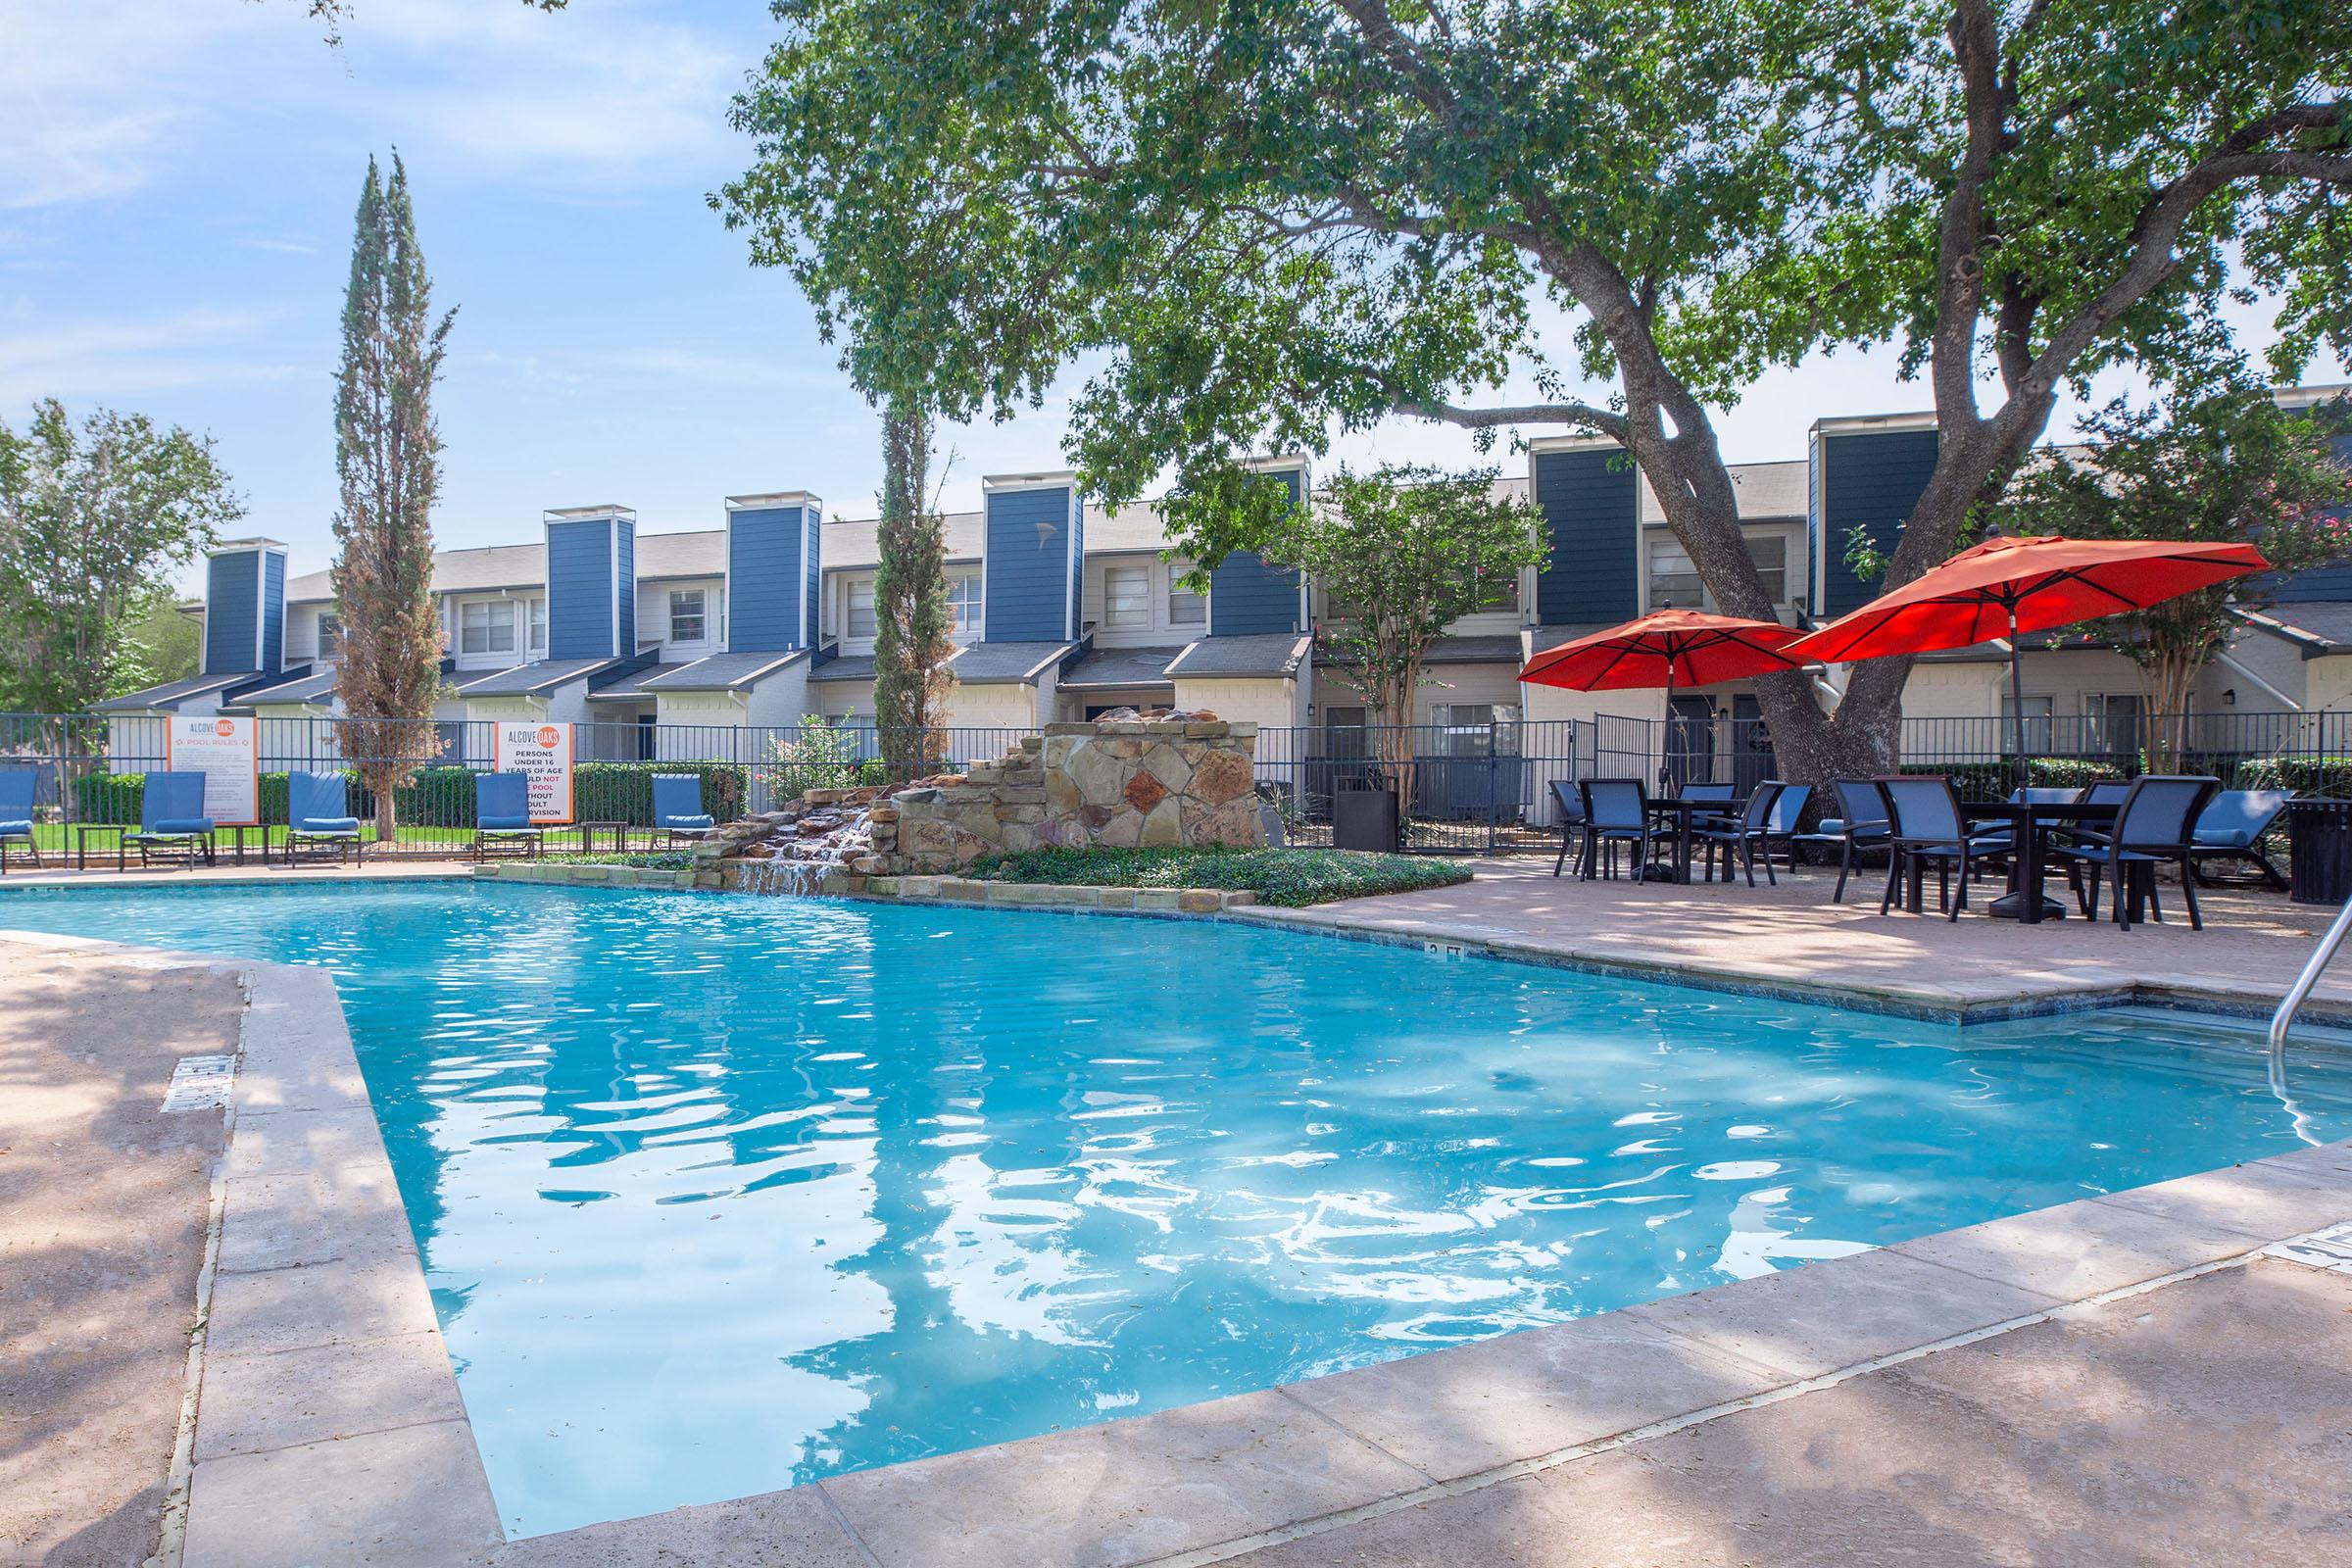 The resort-style pool surrounded by loungers at Rise North Arlington.